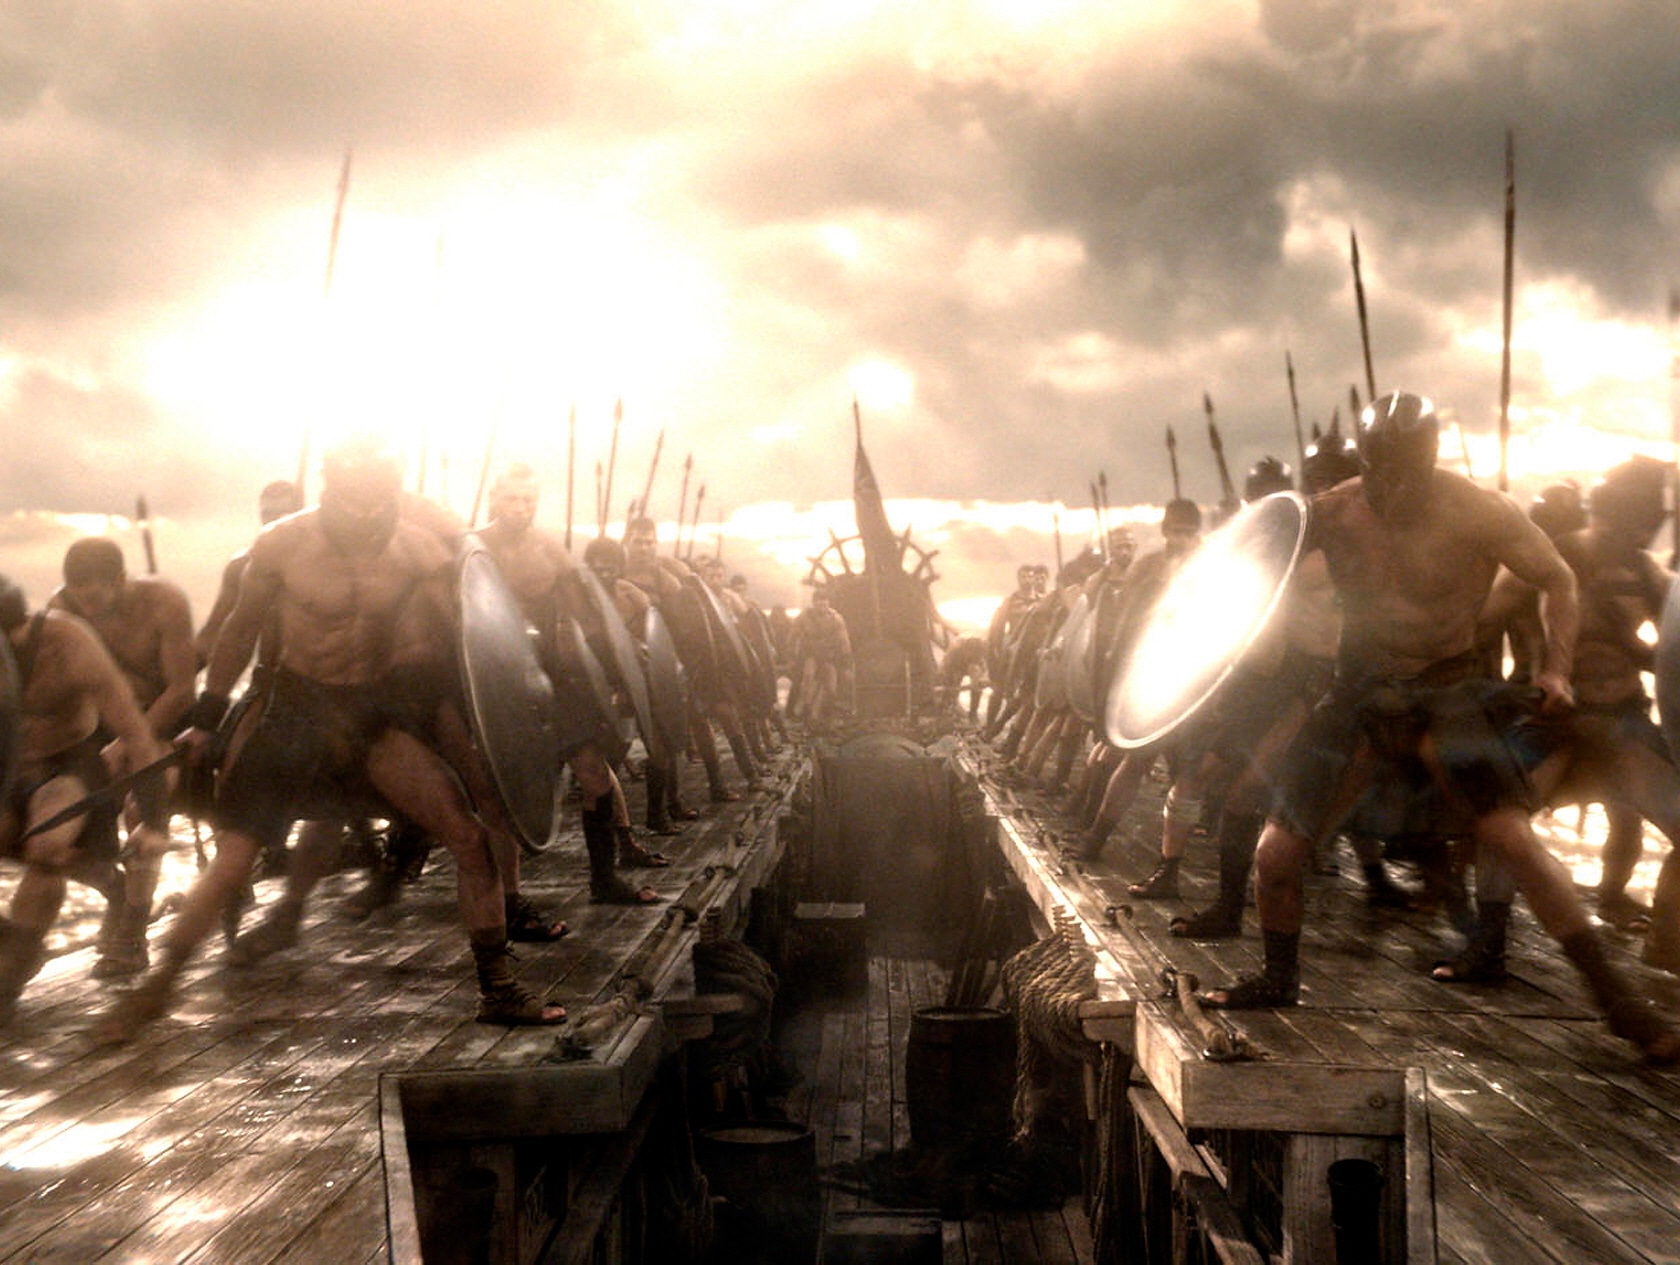 Movie News: Latest release date for 300: Rise of an Empire pushed to March, 2014.